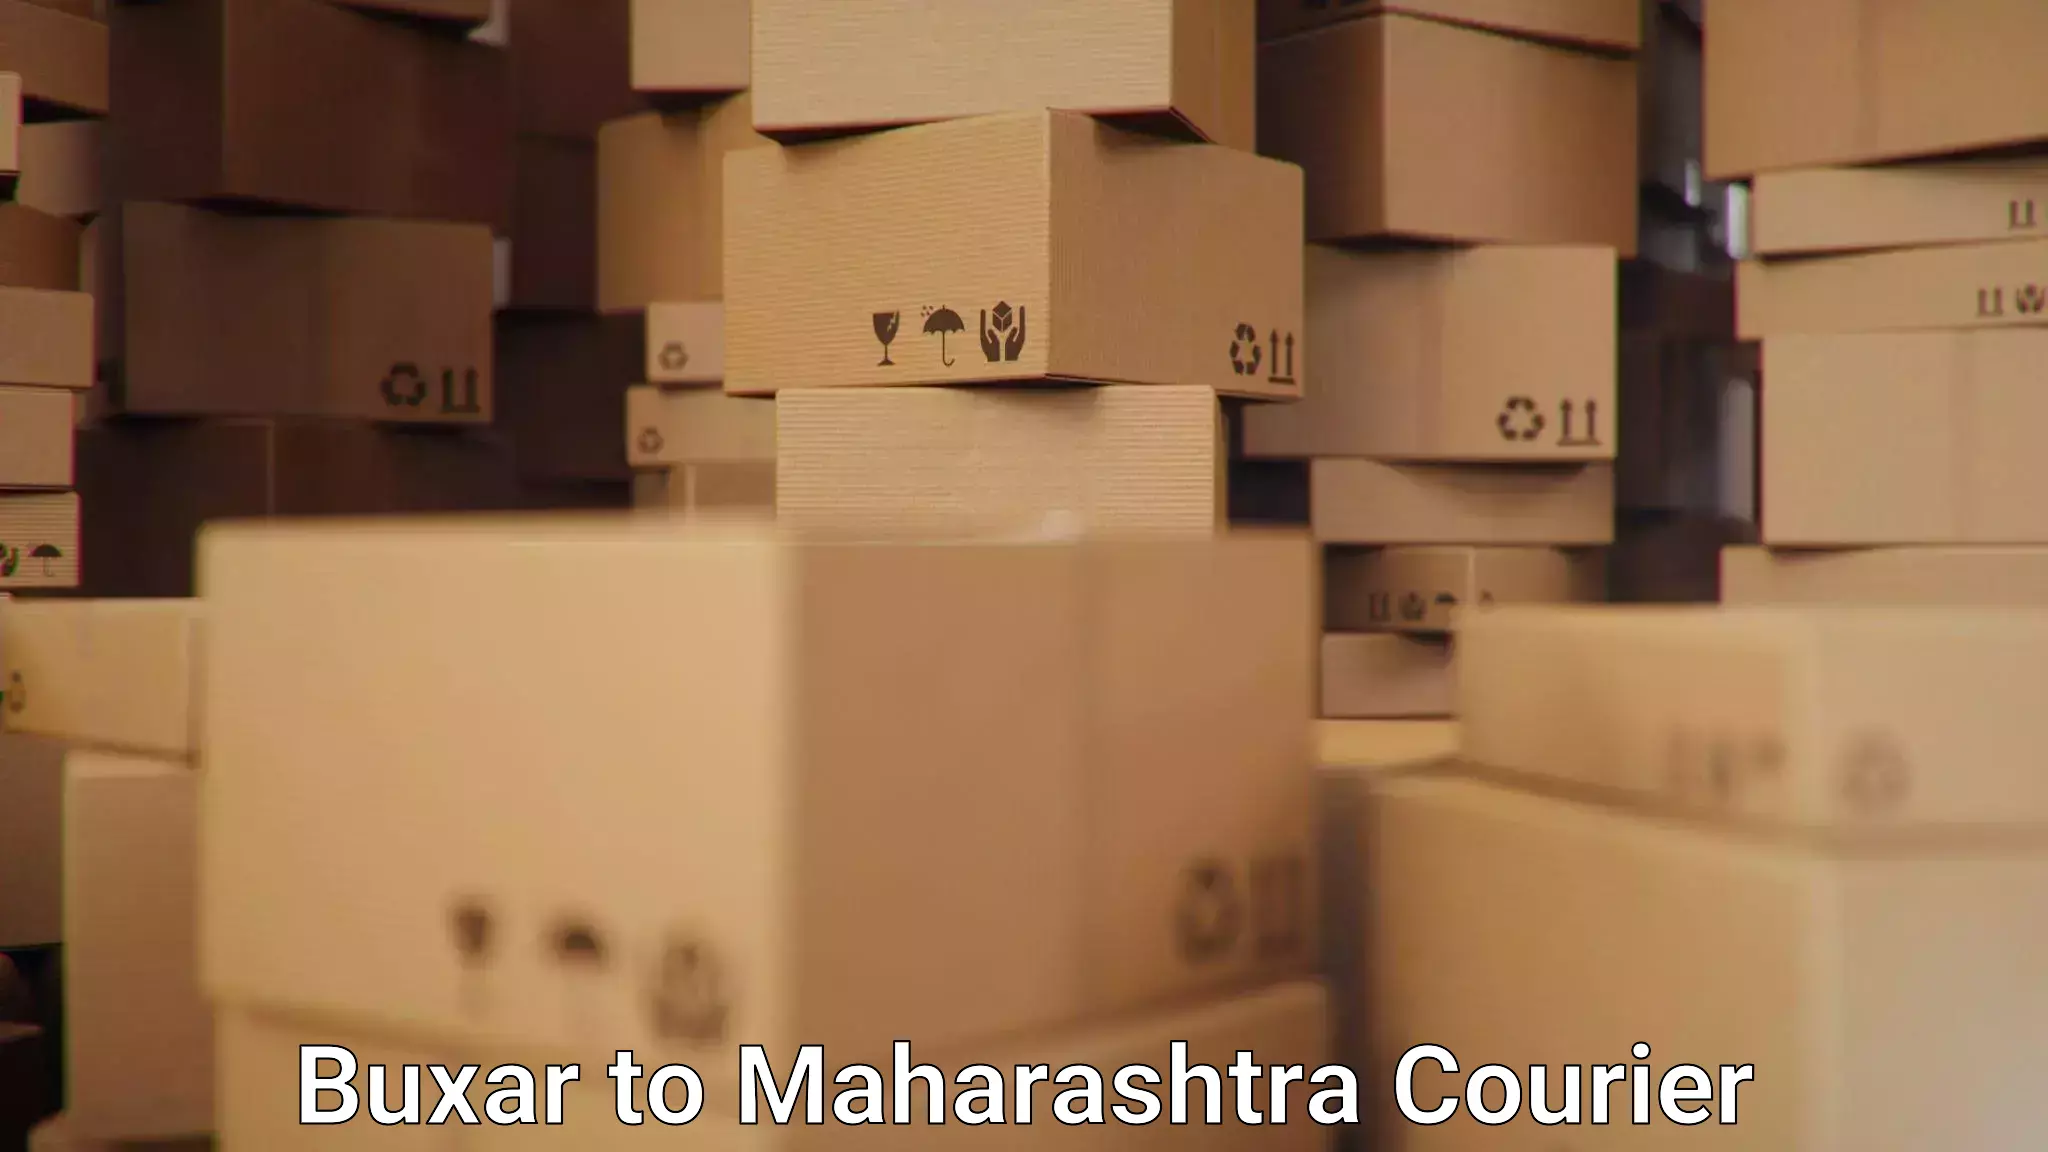 Easy access courier services in Buxar to Mumbai Port